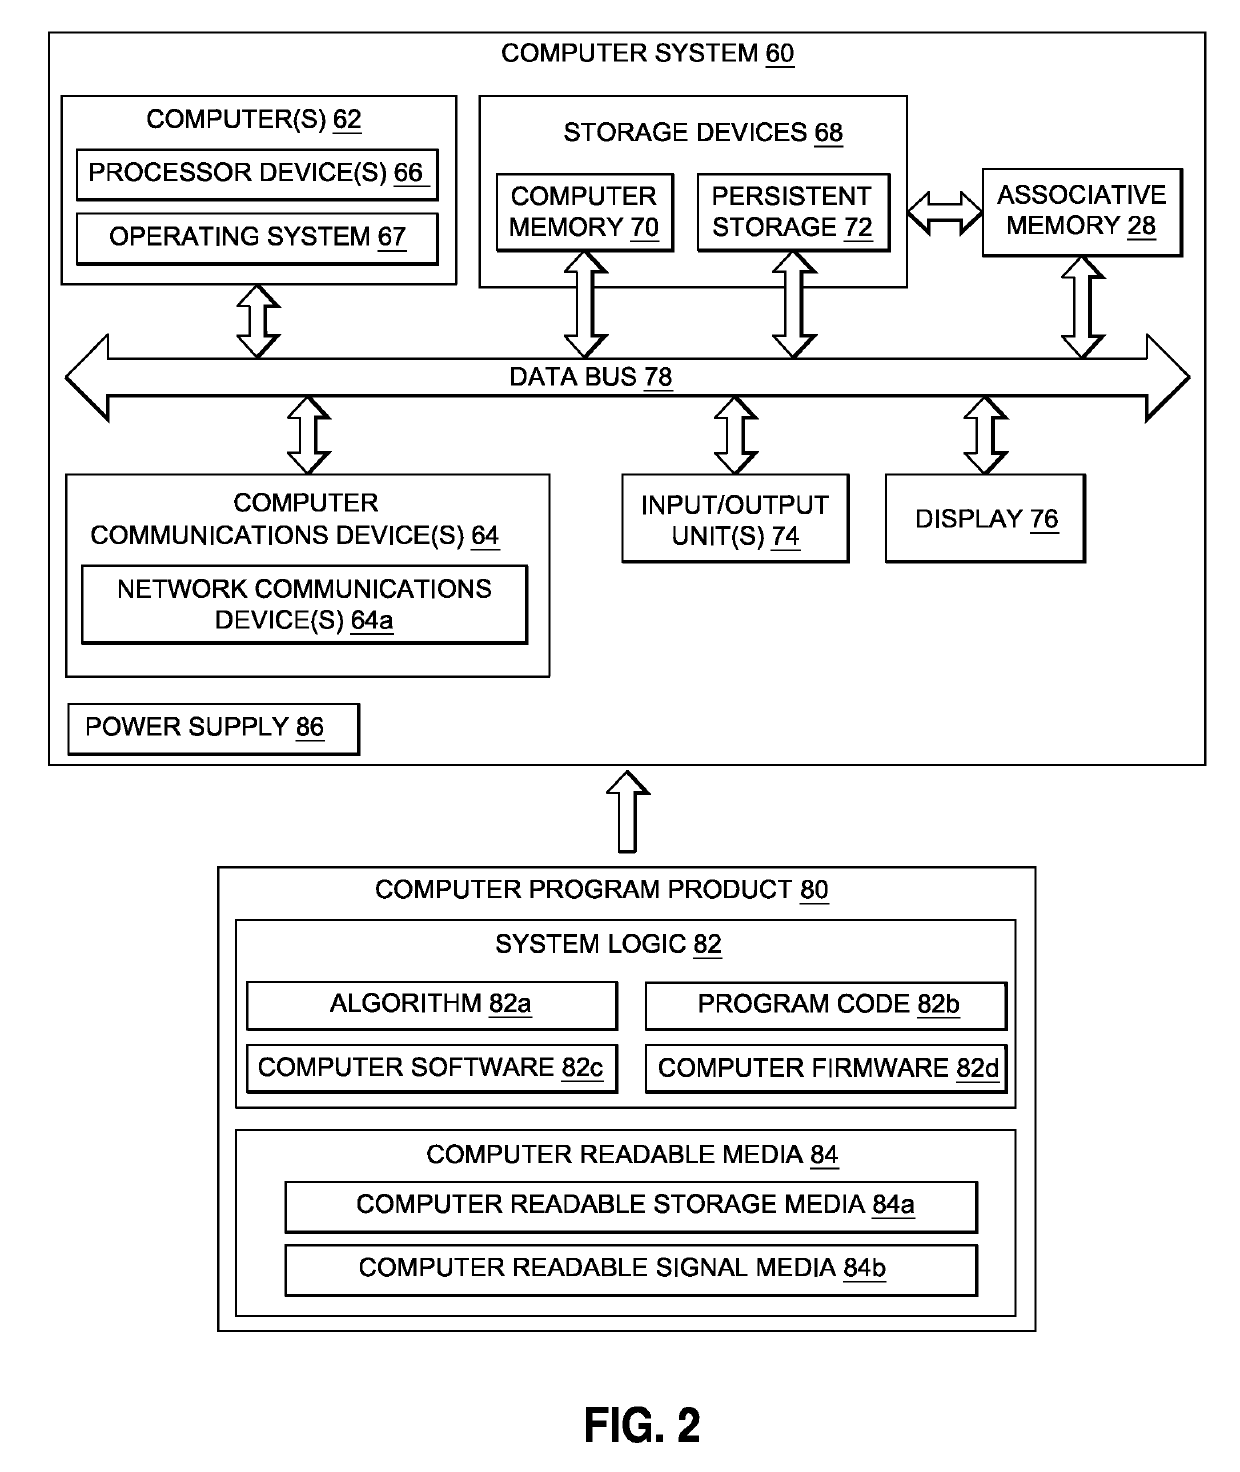 Data driven classification and troubleshooting system and method using associative memory and a machine learning algorithm to improve the accuracy and performance of the associative memory